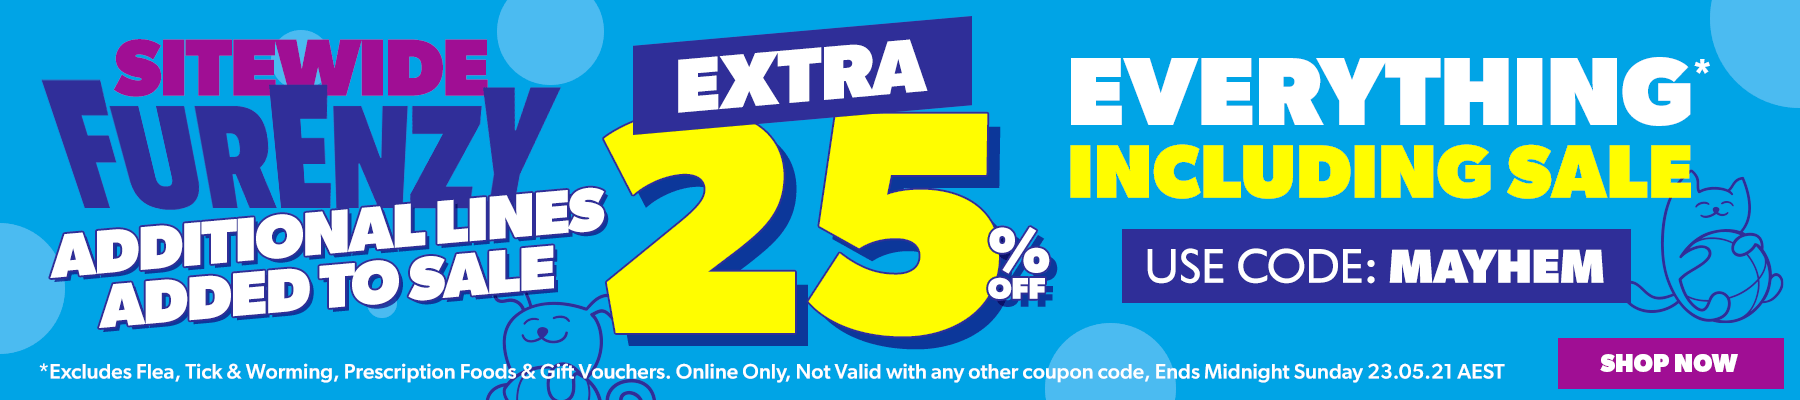 Save extra 25% OFF sitewide including sale